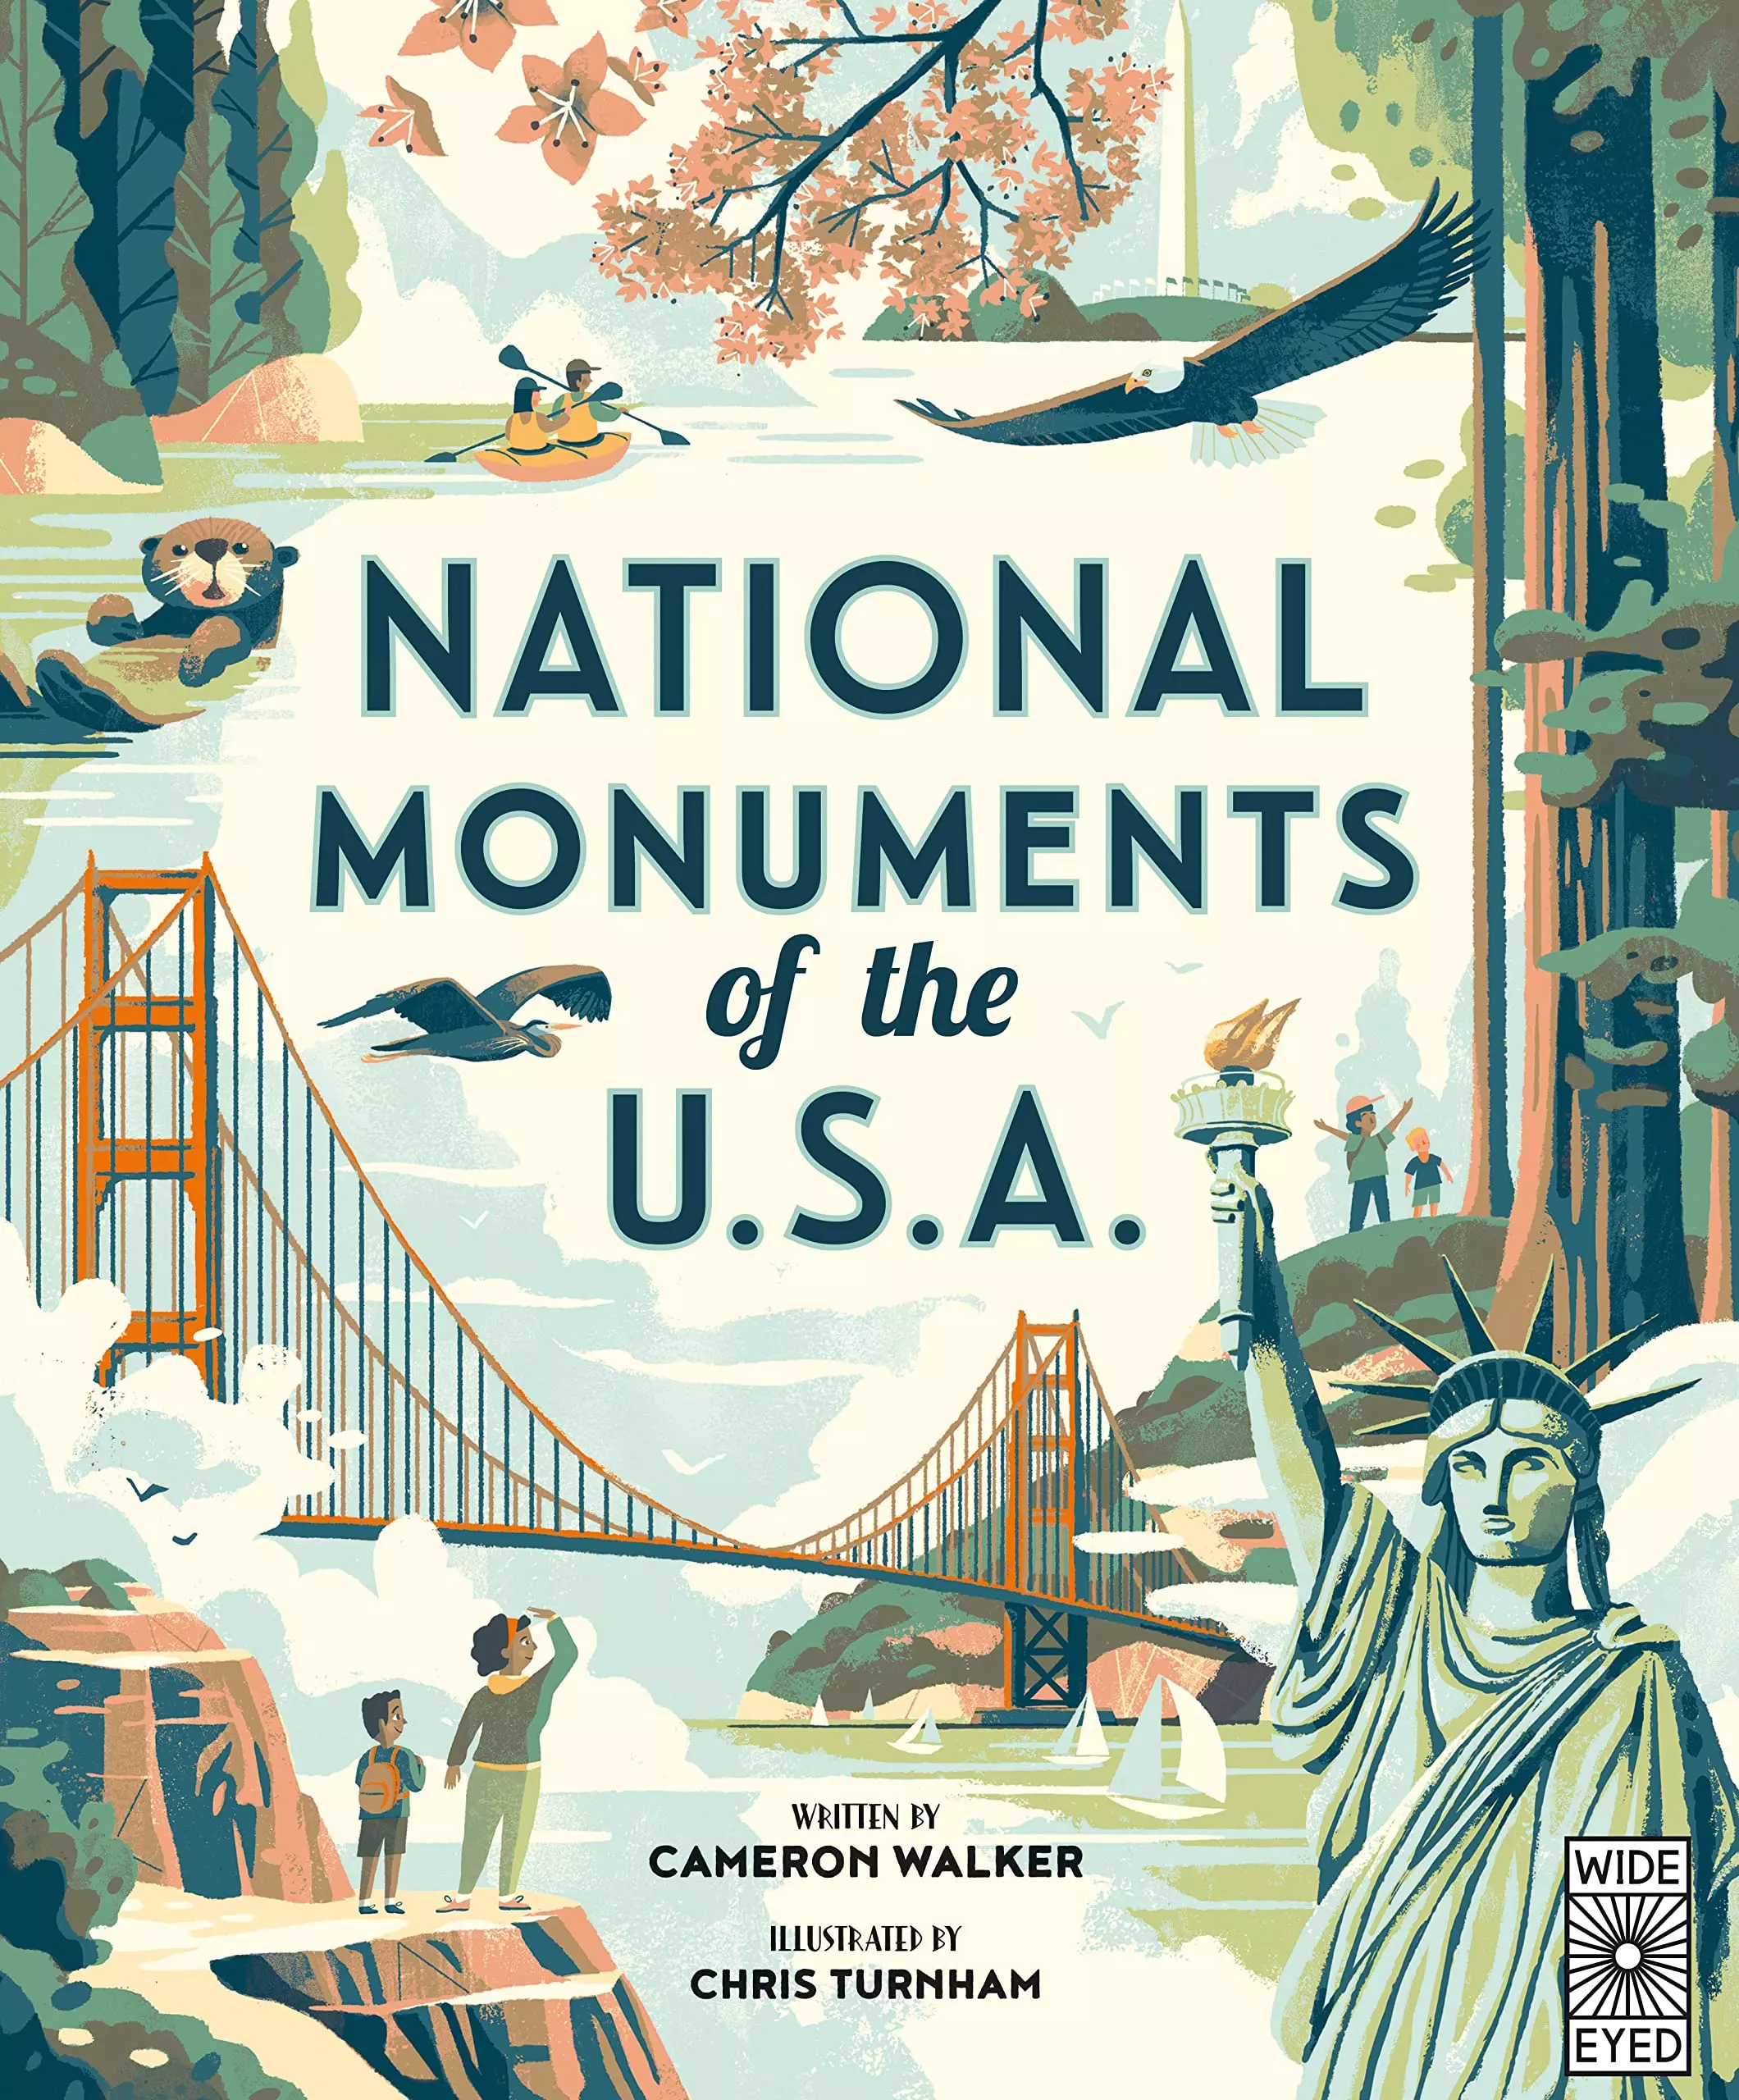 National Monuments of the U.S.A., Chris Turnham